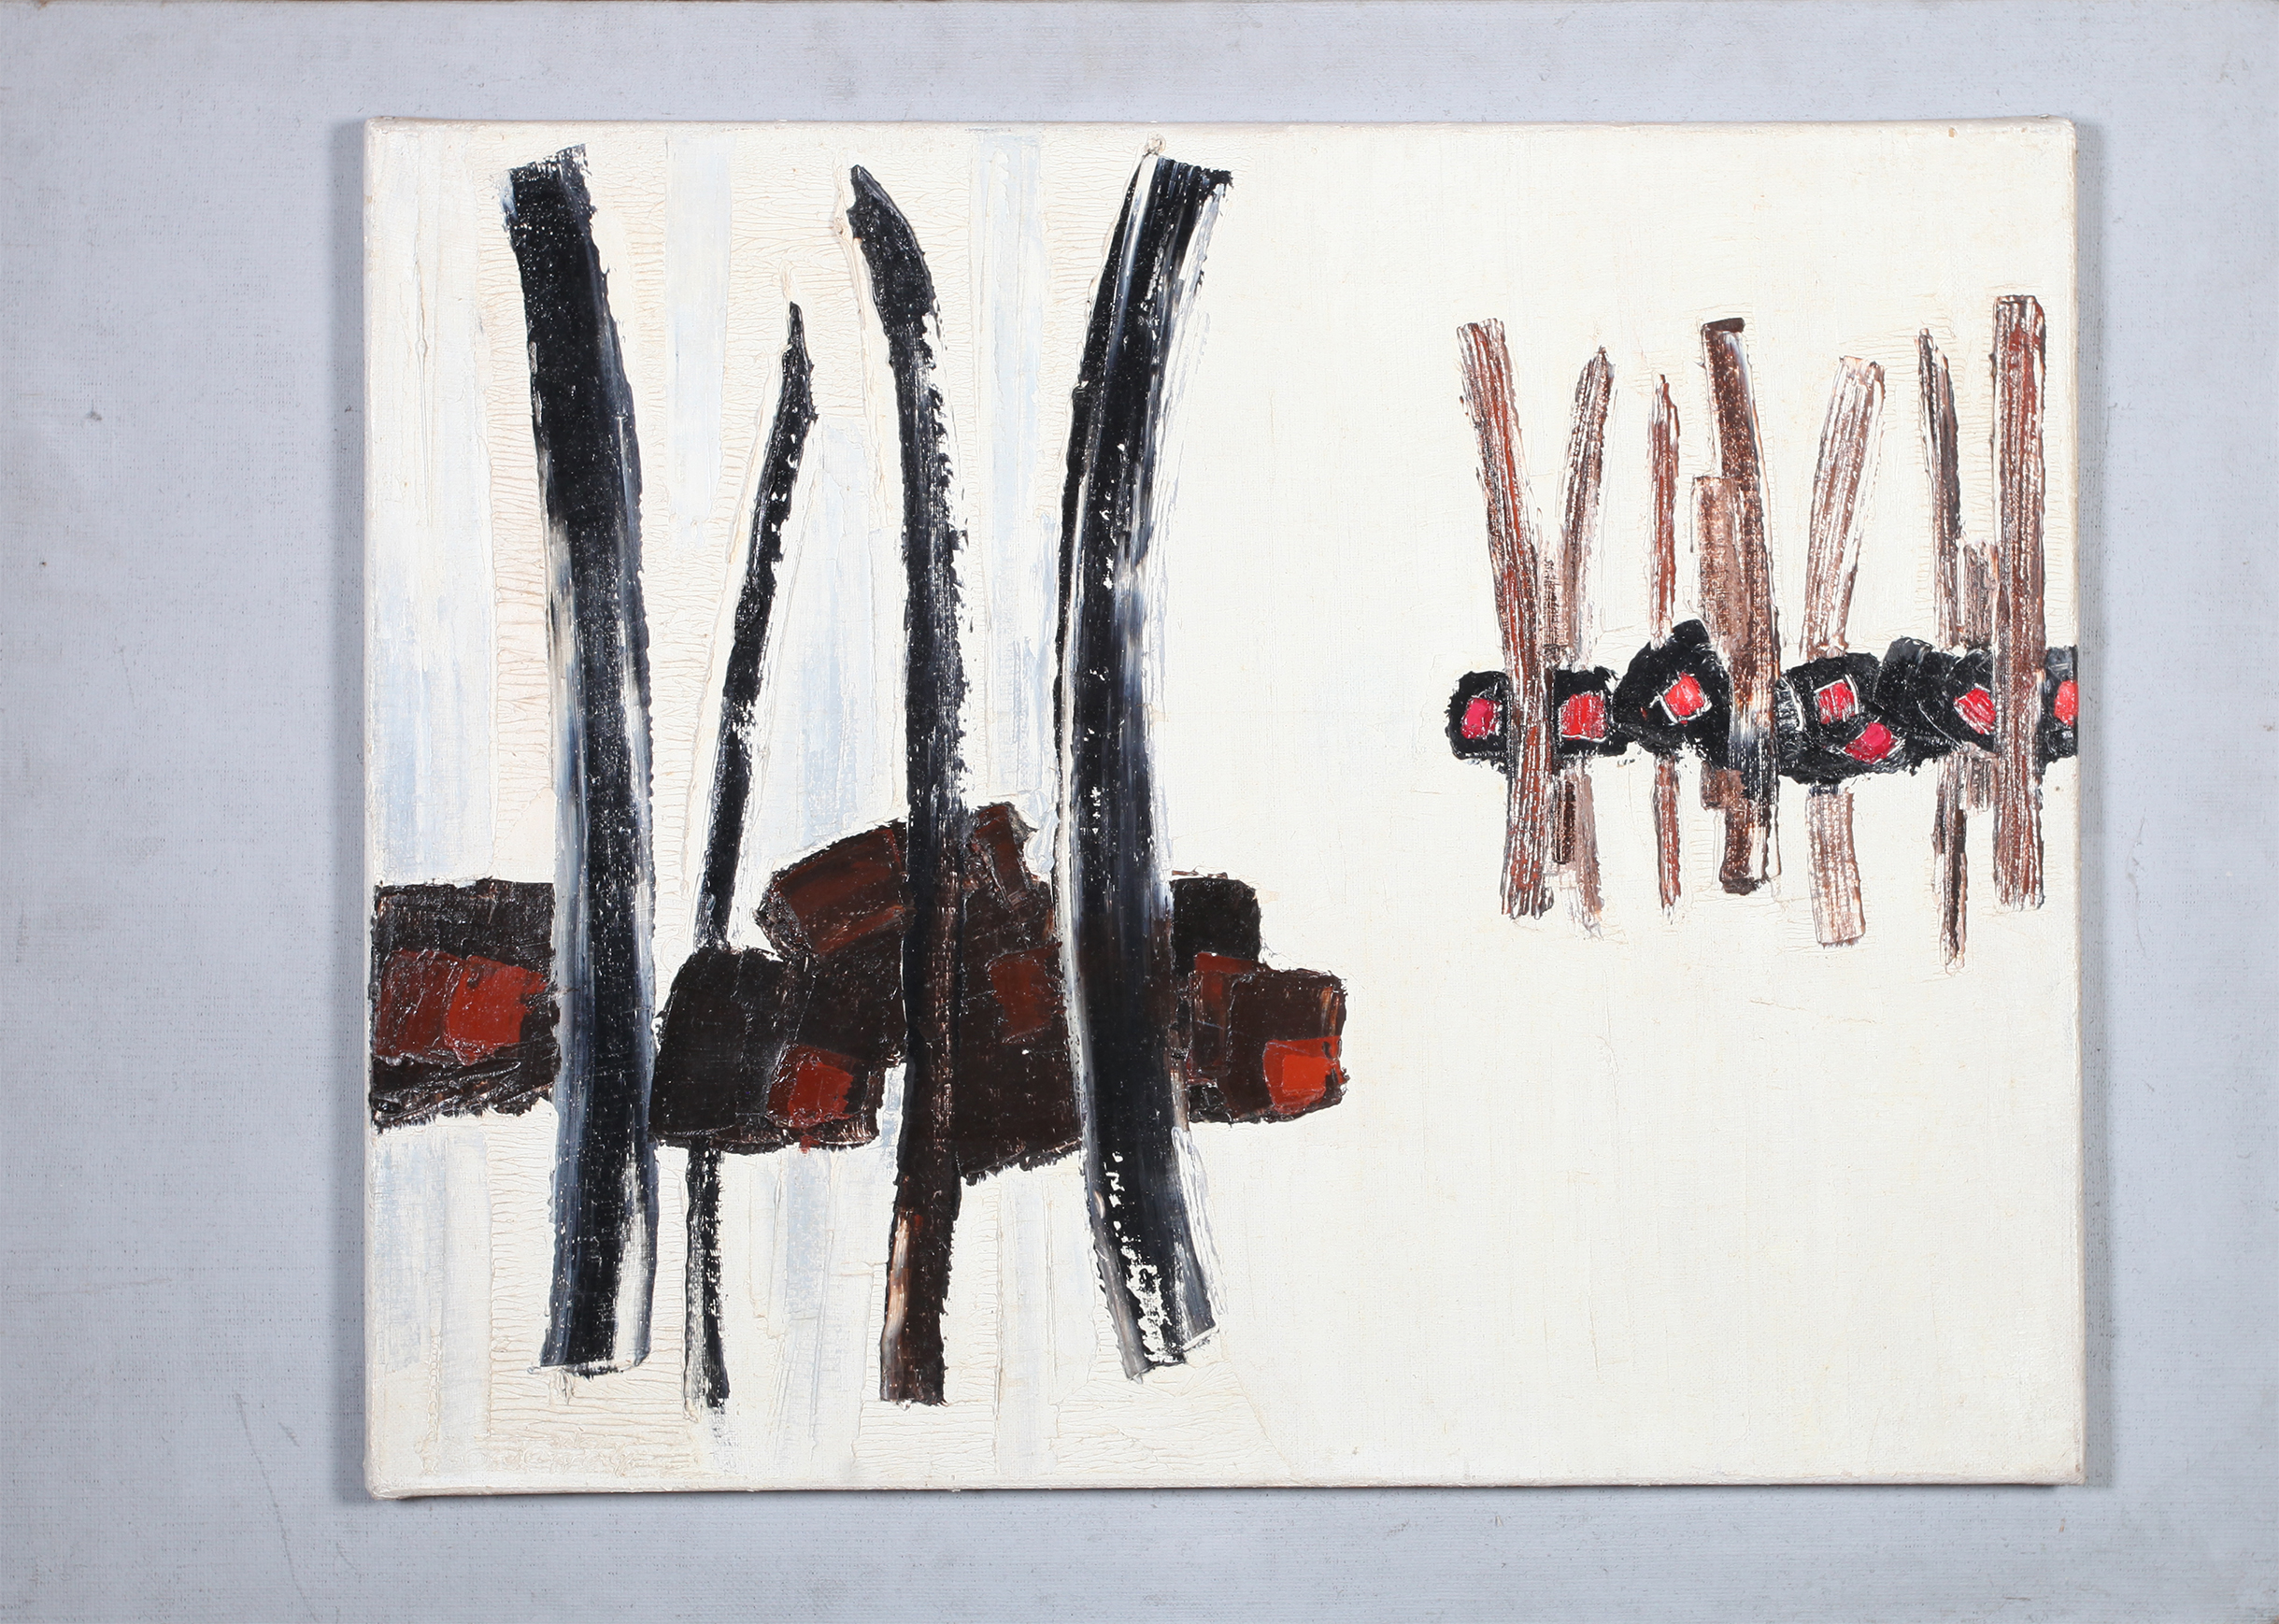 ARR DRUIE BOWETT (1924-1998) Dyptic, verticals in black and brown with red, oil on canvas, signed to - Image 2 of 8